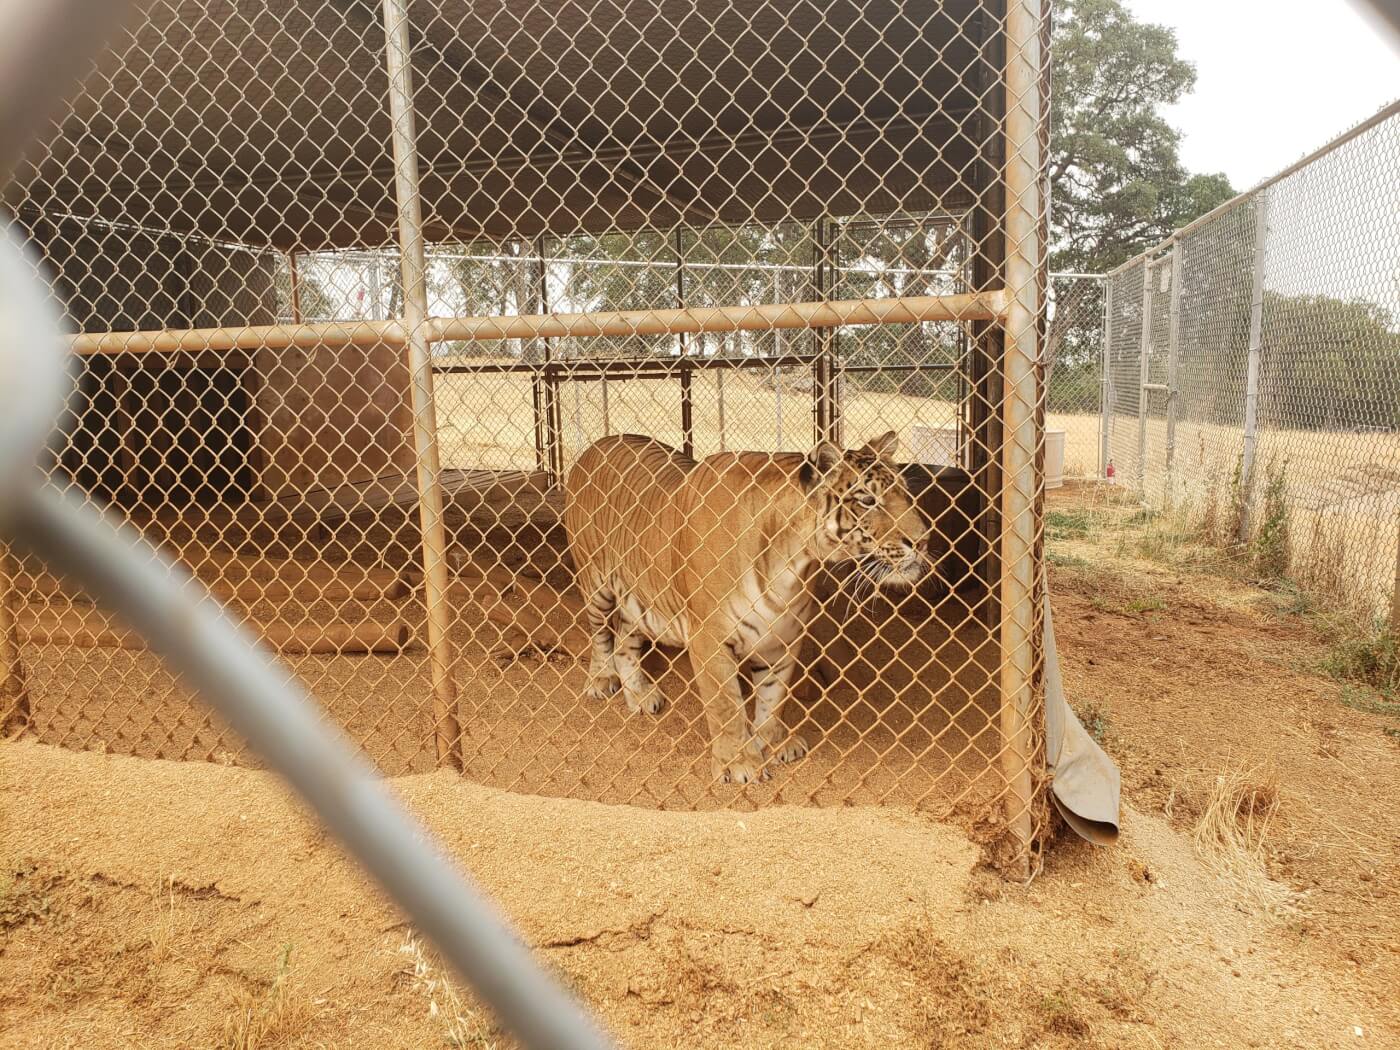 overweight Tiliger in a cage at Kirshner Wildlife Foundation